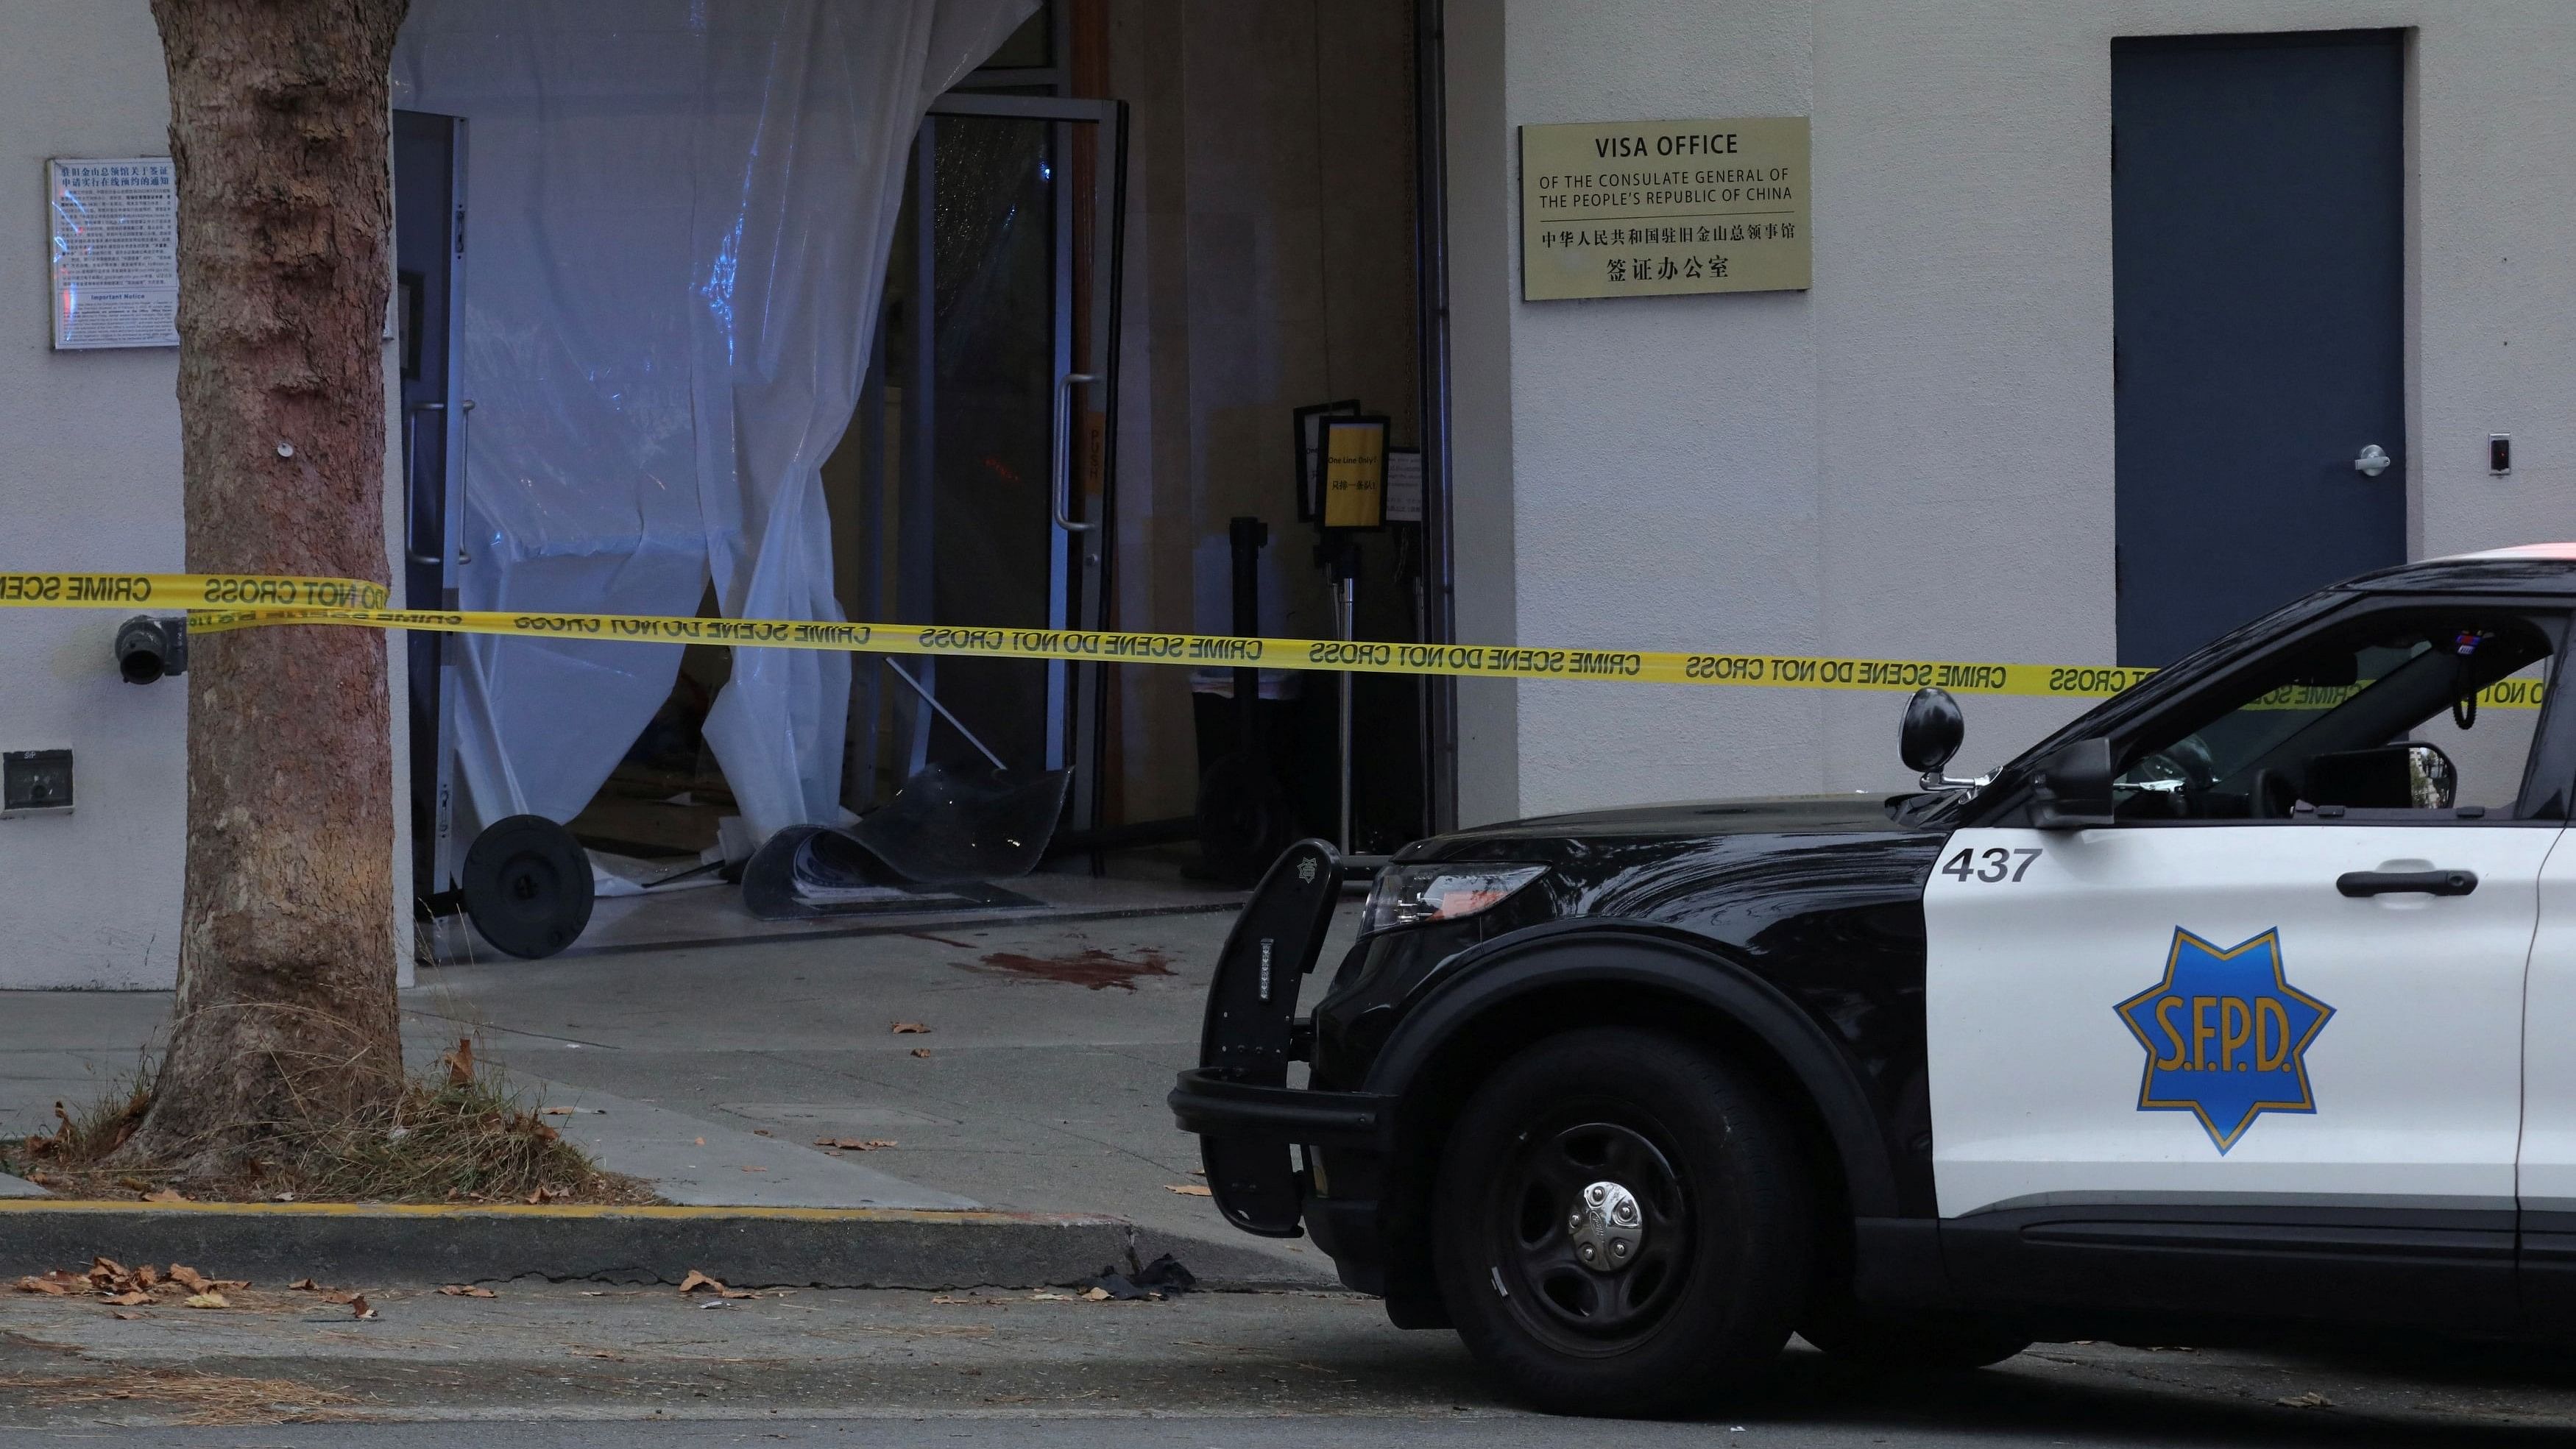 <div class="paragraphs"><p>San Francisco Police vehicle is parked on the street near the visa office of the Chinese consulate, where local media has reported a vehicle may have crashed into the building.</p></div>